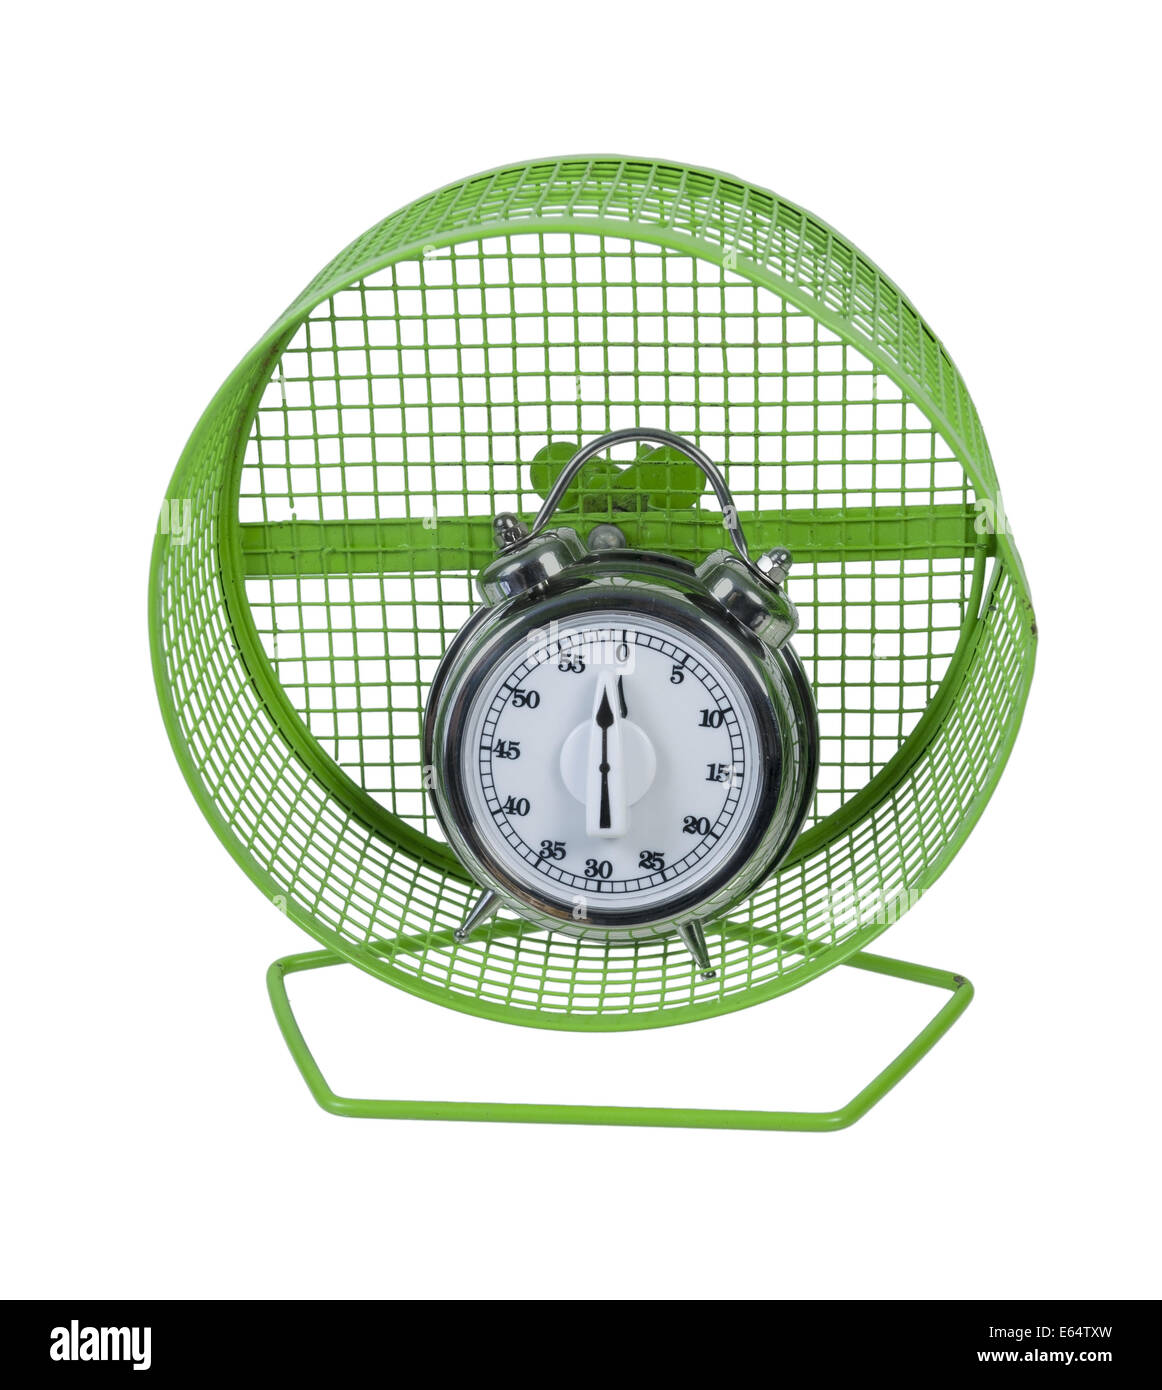 Timer in an exercise wheel used for health practices and staying fit in timed periods - path included Stock Photo